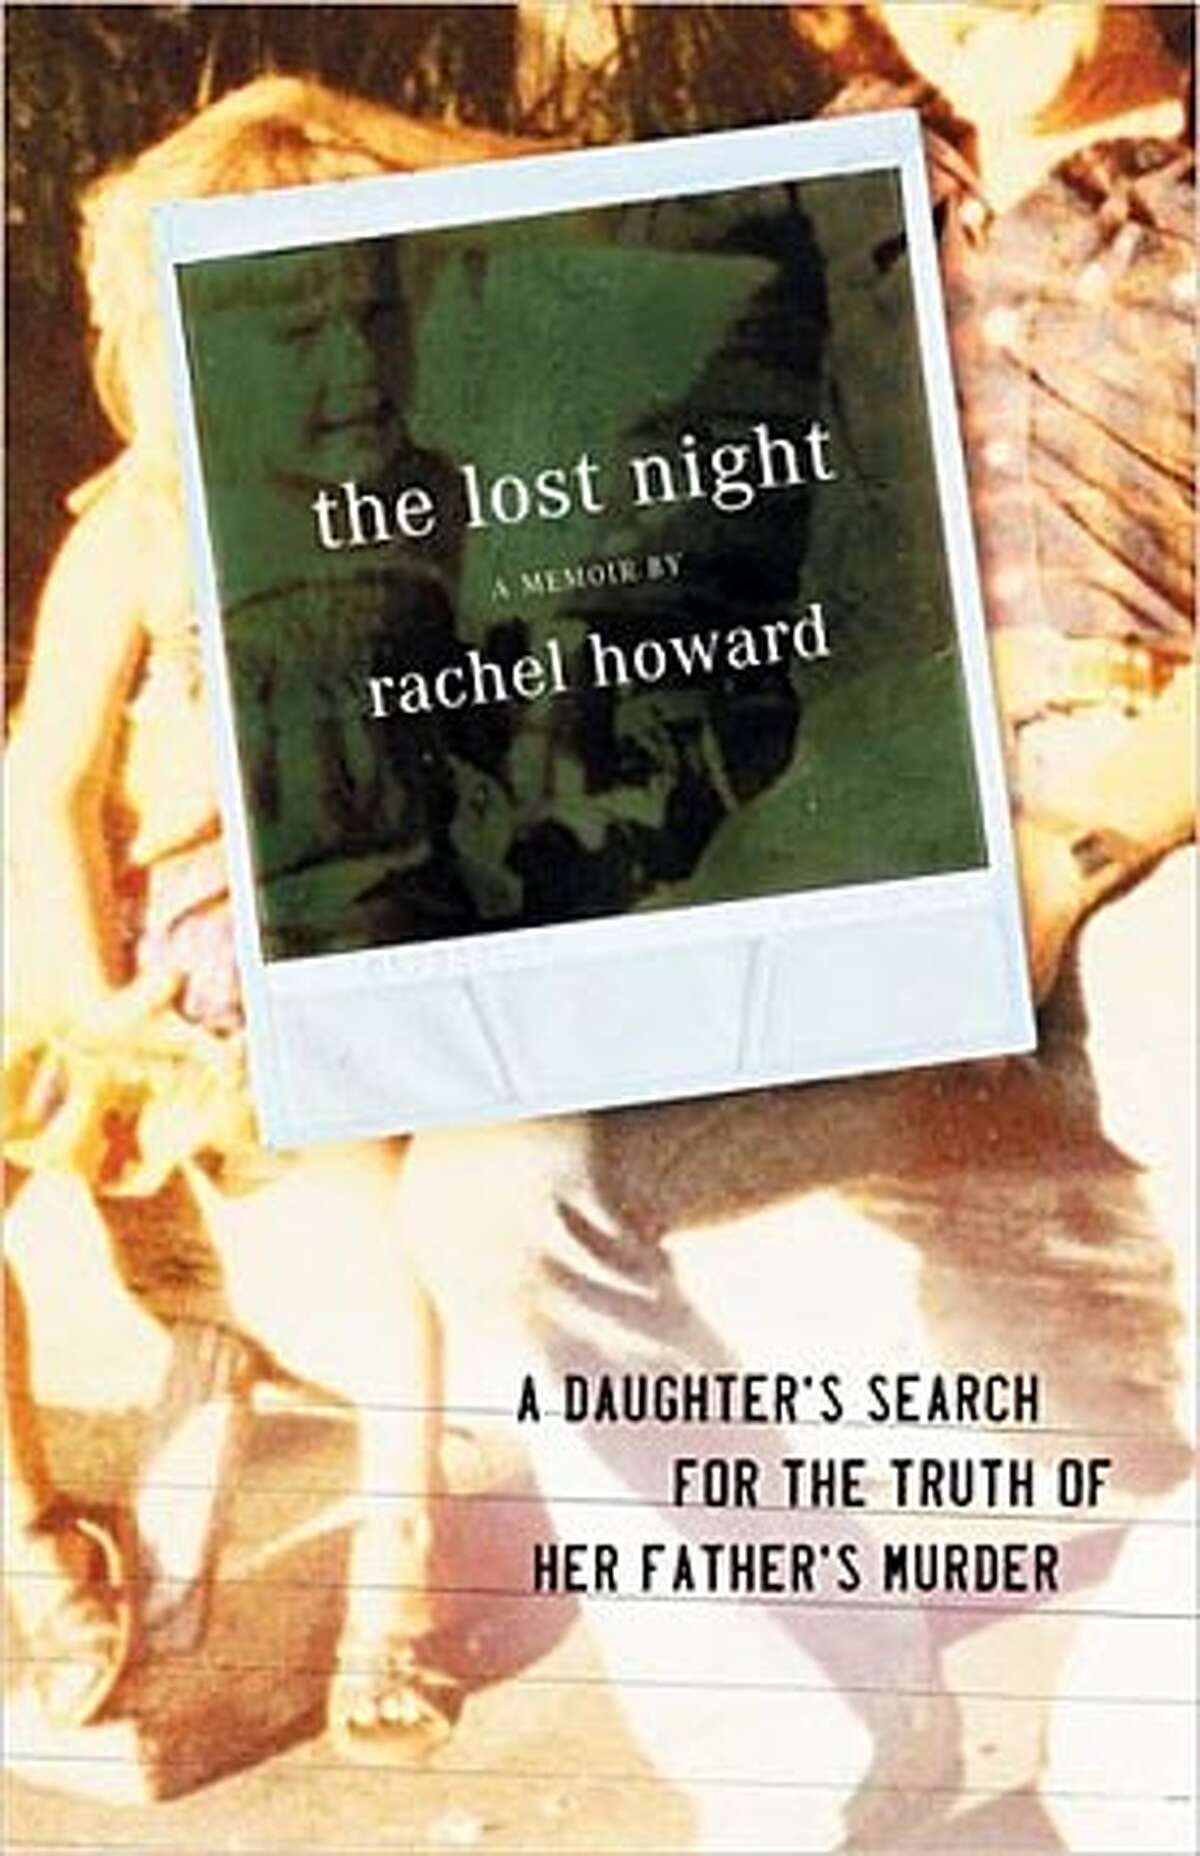 SUMMER29_PH3.JPG Book cover of The Lost Night by Rachel Howard handout/ handout BookReview#BookReview#Chronicle#05-29-2005#ALL#2star#e5#0422951573